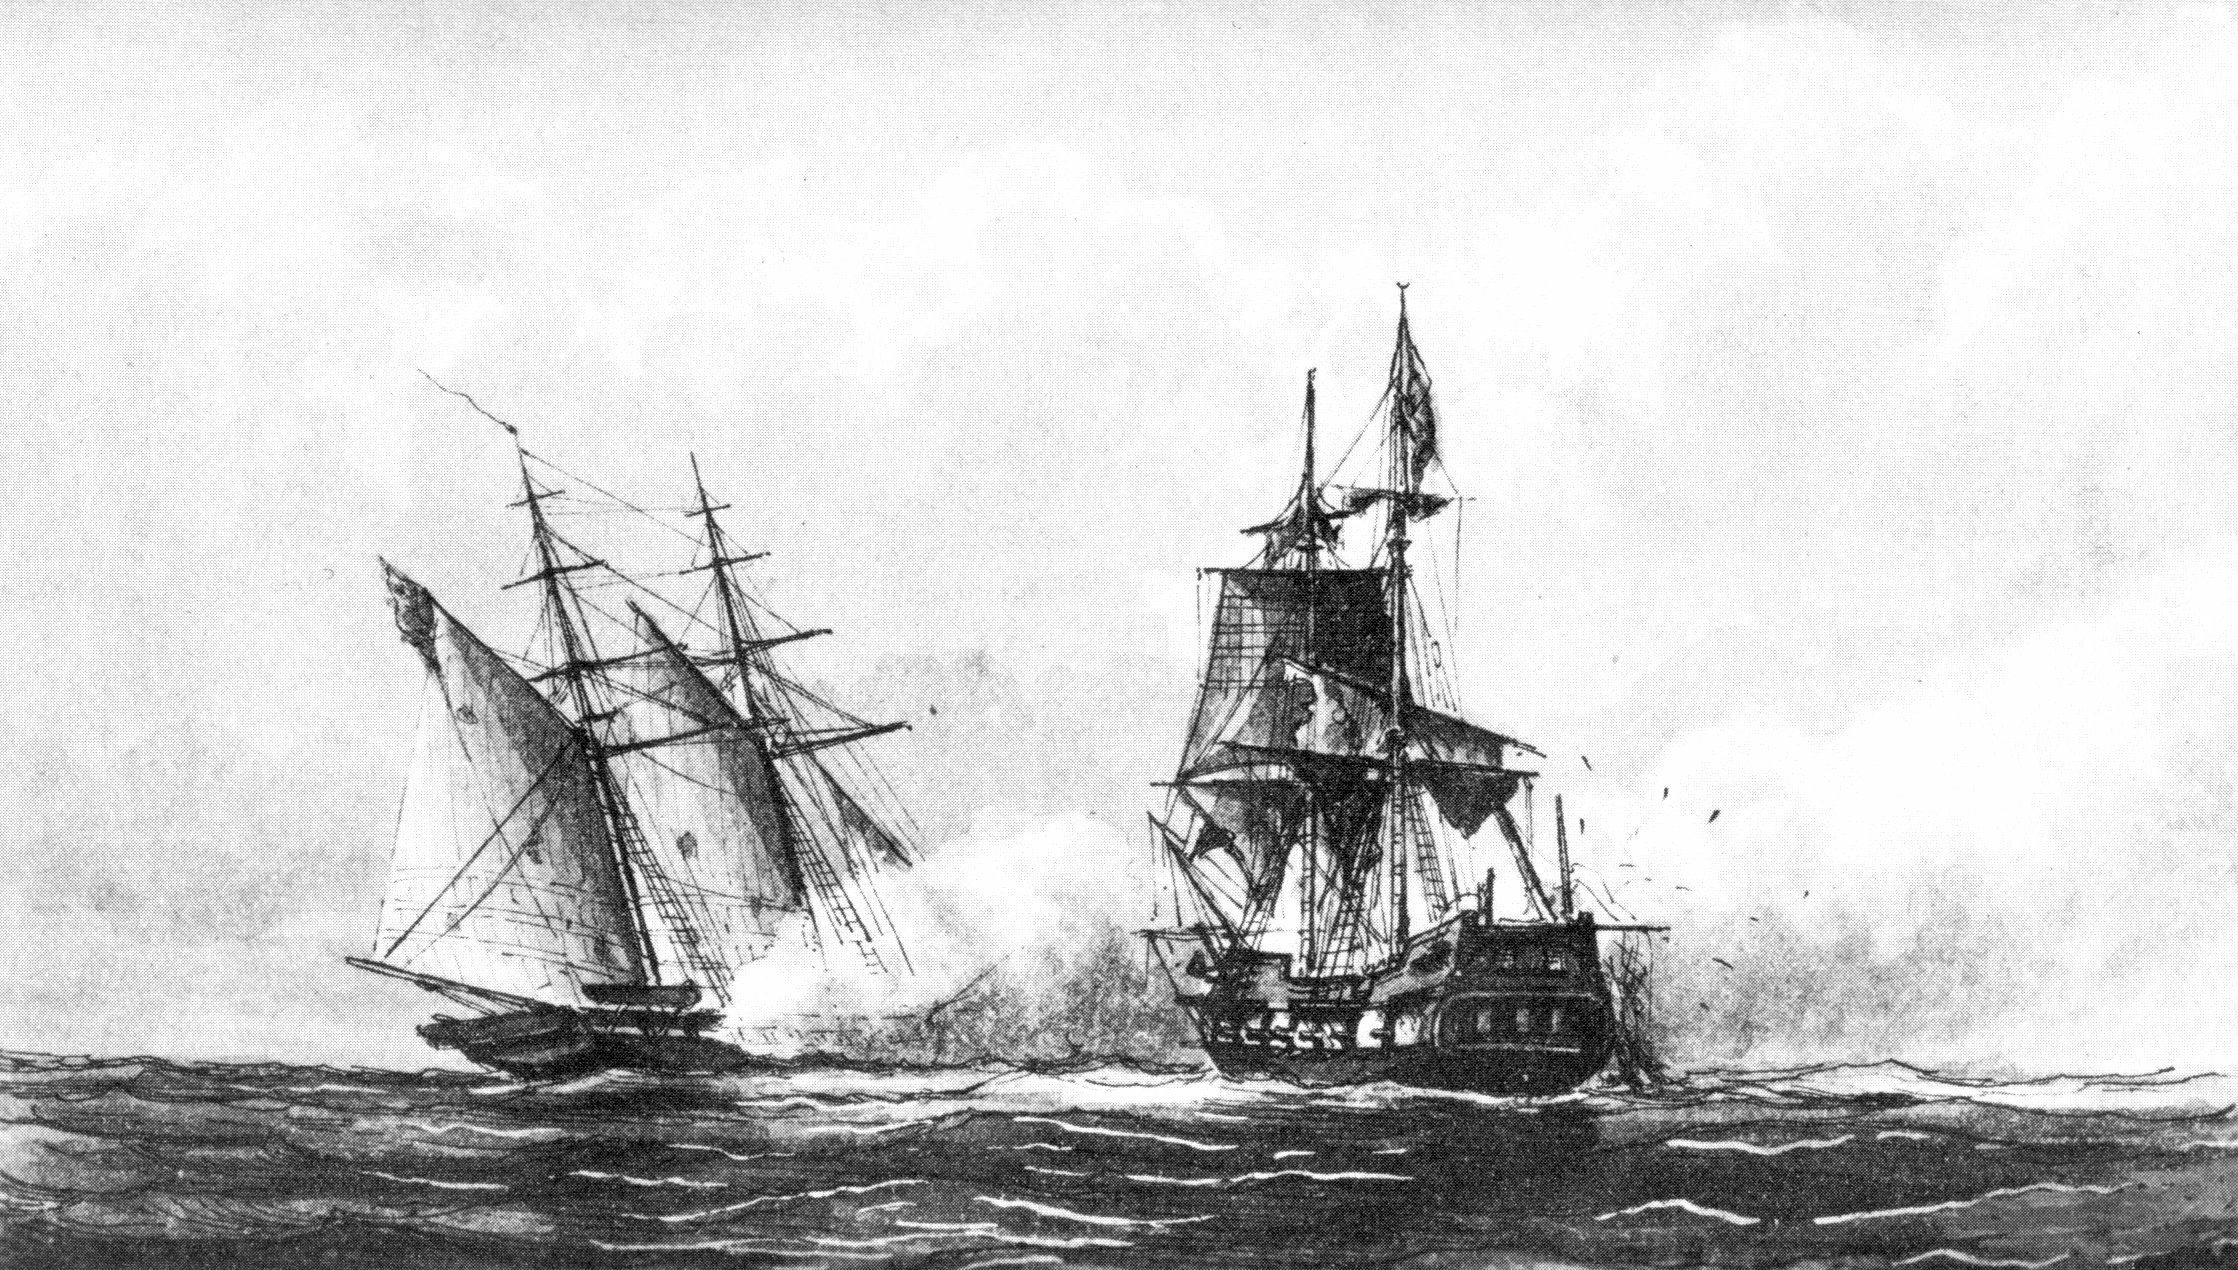 U.S. schooner USS Enterprise capturing the Tripolitan corsair Tripoli, August 1, 1801, from a drawing by Captain William Bainbridge Hoff, U.S. Navy (circa 1878), the collection of the Navy Department.